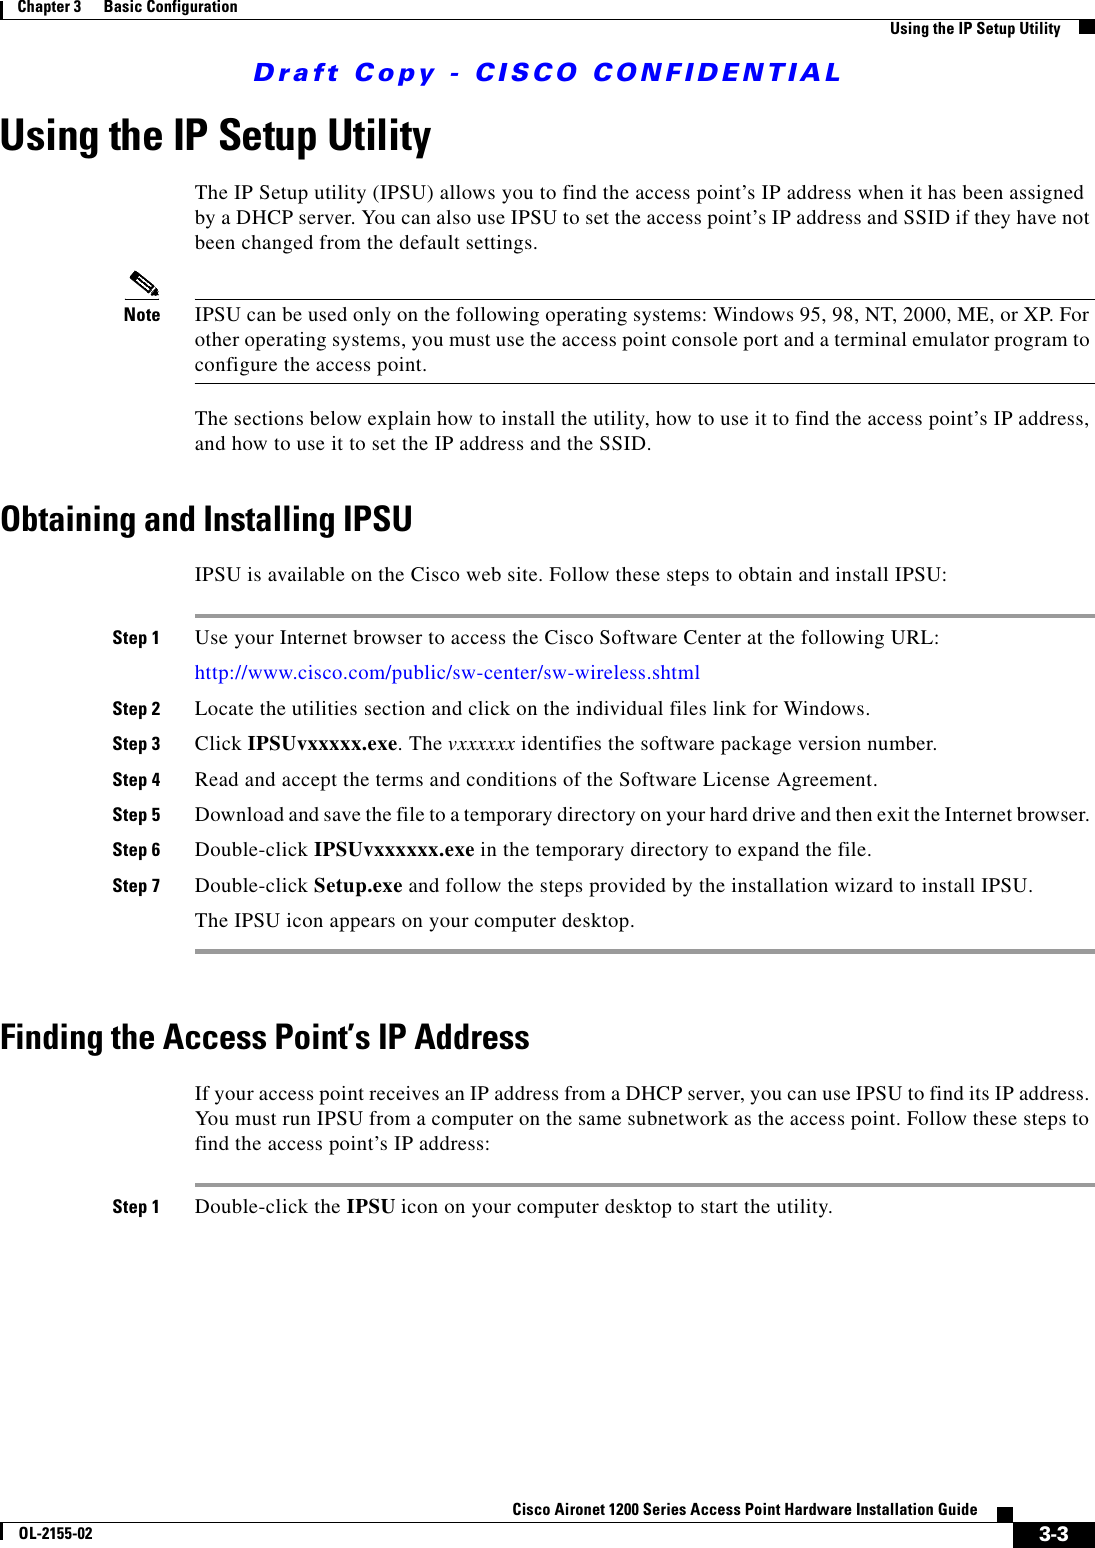 Draft Copy - CISCO CONFIDENTIAL 3-3Cisco Aironet 1200 Series Access Point Hardware Installation GuideOL-2155-02Chapter 3      Basic ConfigurationUsing the IP Setup UtilityUsing the IP Setup UtilityThe IP Setup utility (IPSU) allows you to find the access point’s IP address when it has been assigned by a DHCP server. You can also use IPSU to set the access point’s IP address and SSID if they have not been changed from the default settings.Note IPSU can be used only on the following operating systems: Windows 95, 98, NT, 2000, ME, or XP. For other operating systems, you must use the access point console port and a terminal emulator program to configure the access point.The sections below explain how to install the utility, how to use it to find the access point’s IP address, and how to use it to set the IP address and the SSID.Obtaining and Installing IPSUIPSU is available on the Cisco web site. Follow these steps to obtain and install IPSU:Step 1 Use your Internet browser to access the Cisco Software Center at the following URL:http://www.cisco.com/public/sw-center/sw-wireless.shtmlStep 2 Locate the utilities section and click on the individual files link for Windows.Step 3 Click IPSUvxxxxx.exe. The vxxxxxx identifies the software package version number.Step 4 Read and accept the terms and conditions of the Software License Agreement.Step 5 Download and save the file to a temporary directory on your hard drive and then exit the Internet browser. Step 6 Double-click IPSUvxxxxxx.exe in the temporary directory to expand the file.Step 7 Double-click Setup.exe and follow the steps provided by the installation wizard to install IPSU.The IPSU icon appears on your computer desktop.Finding the Access Point’s IP AddressIf your access point receives an IP address from a DHCP server, you can use IPSU to find its IP address. You must run IPSU from a computer on the same subnetwork as the access point. Follow these steps to find the access point’s IP address:Step 1 Double-click the IPSU icon on your computer desktop to start the utility. 